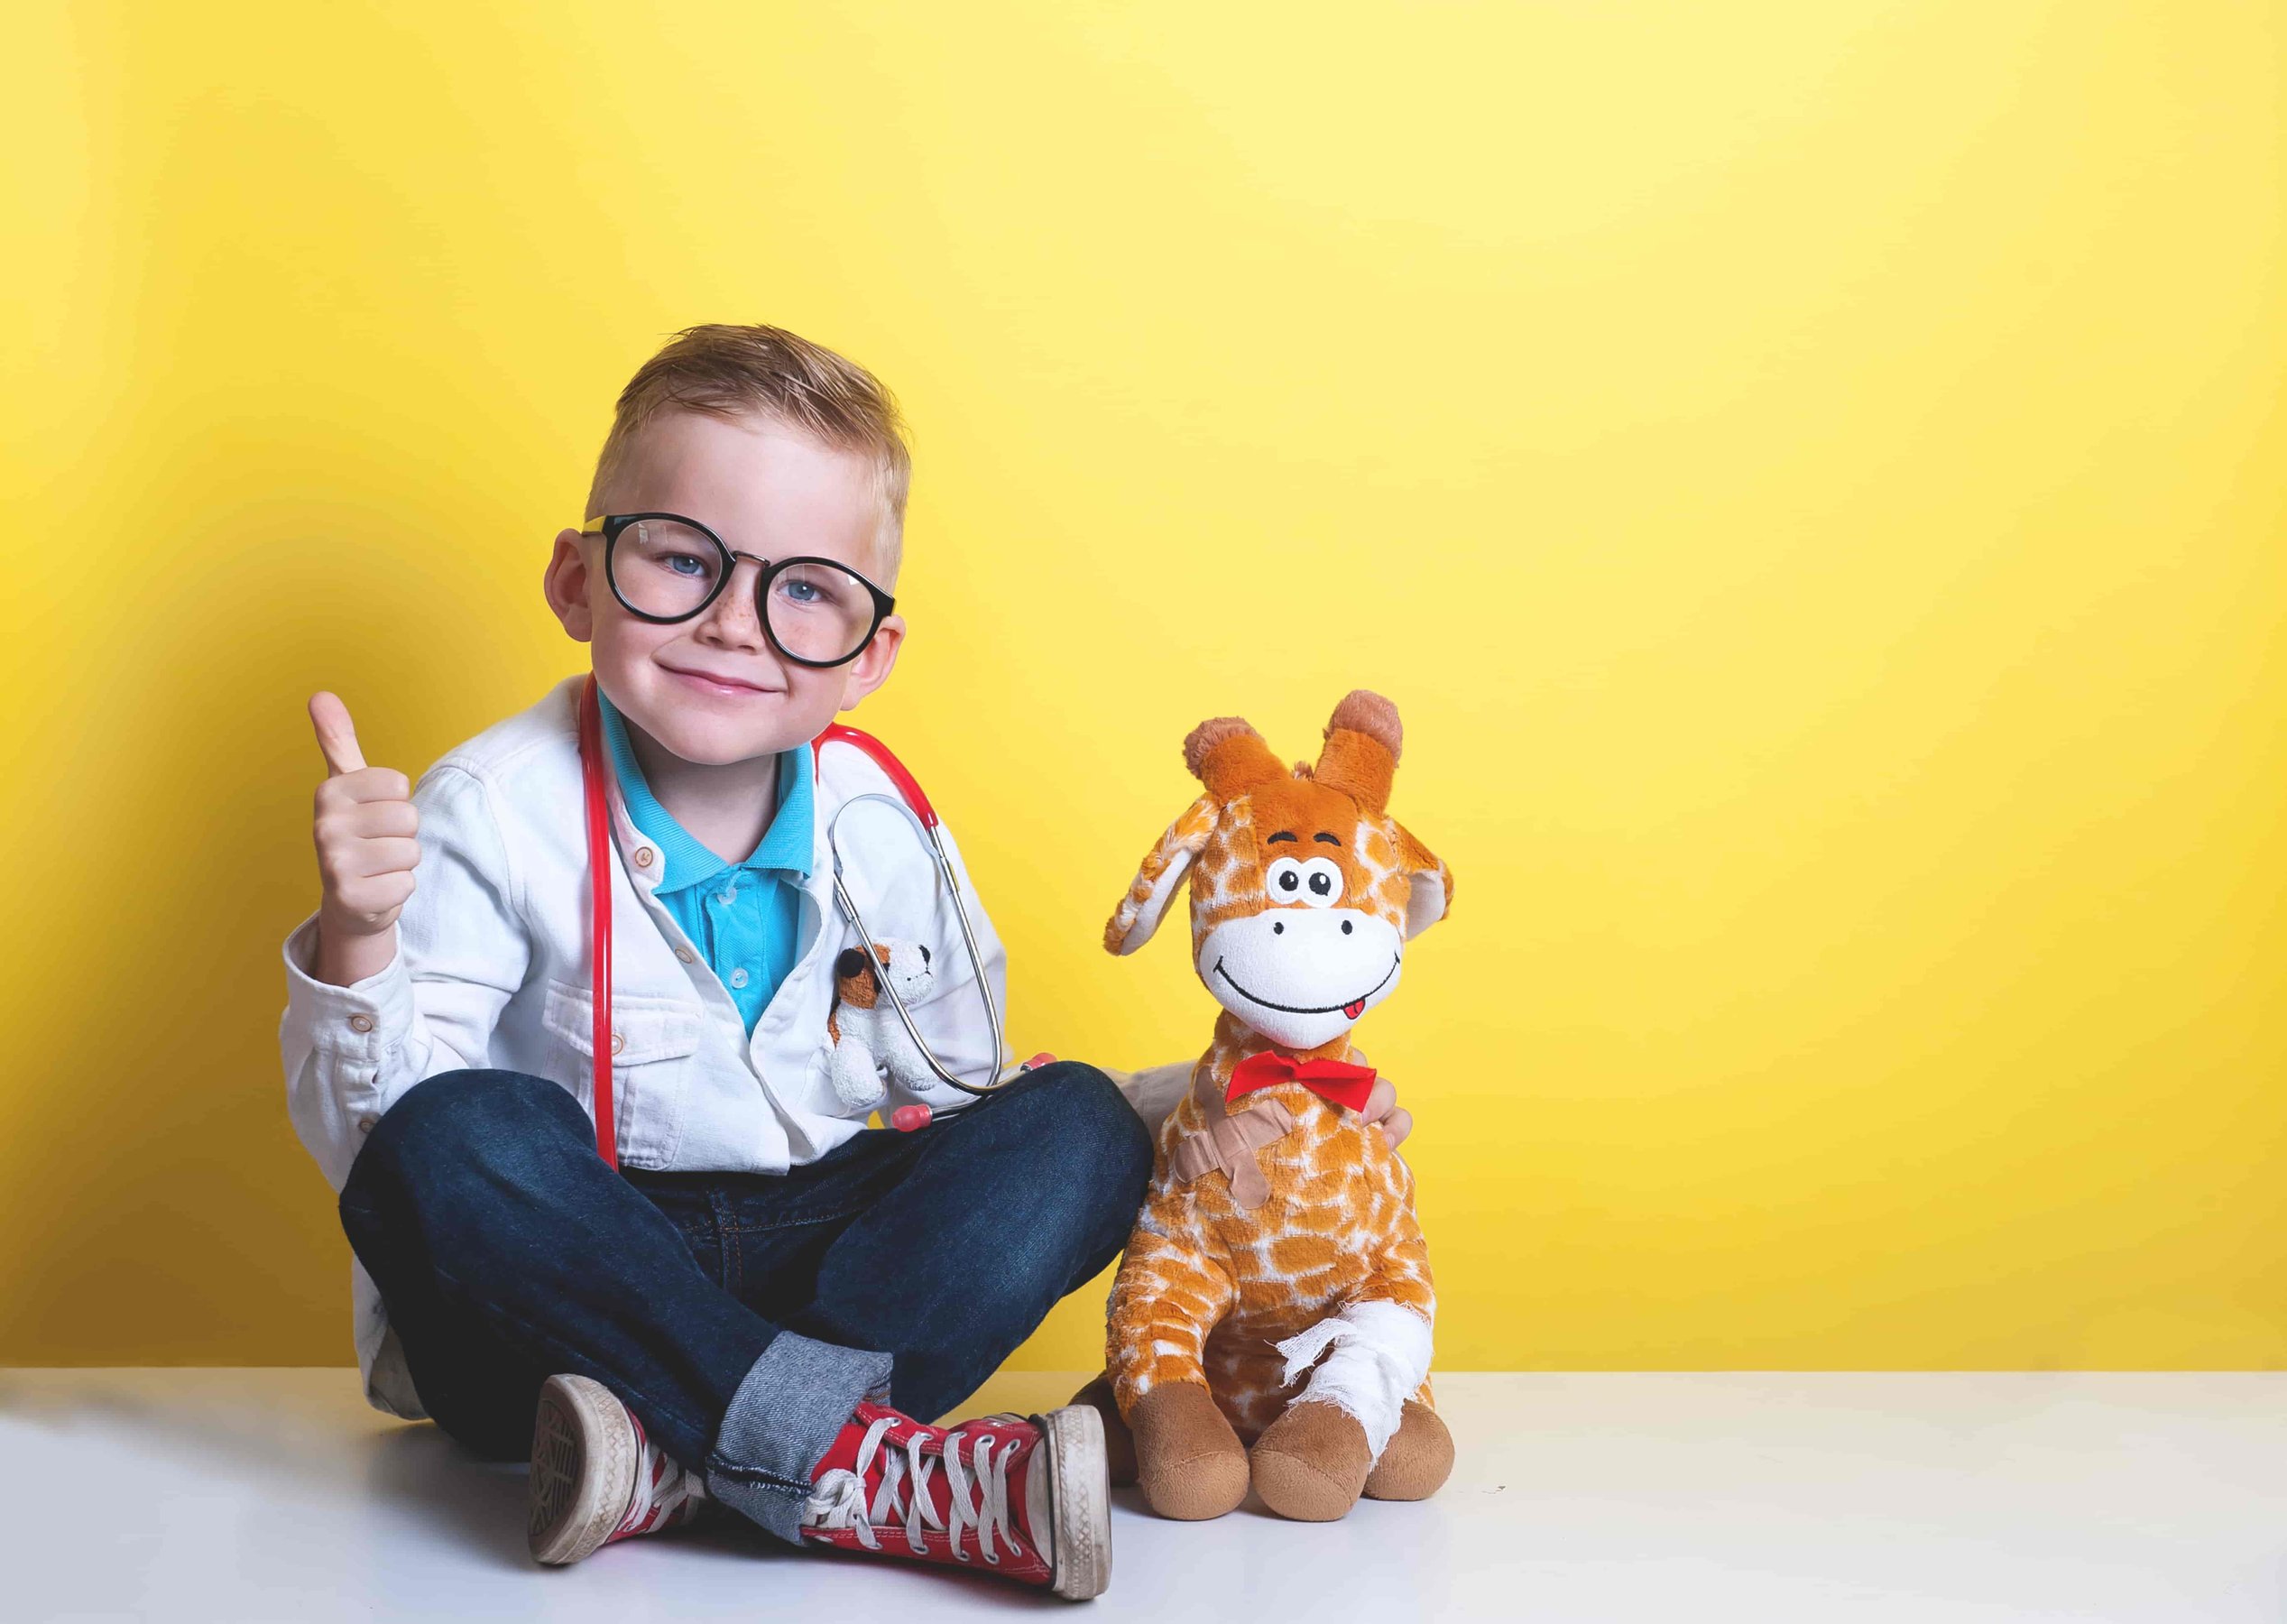 Smiling kid playing doctor with toy giraffe